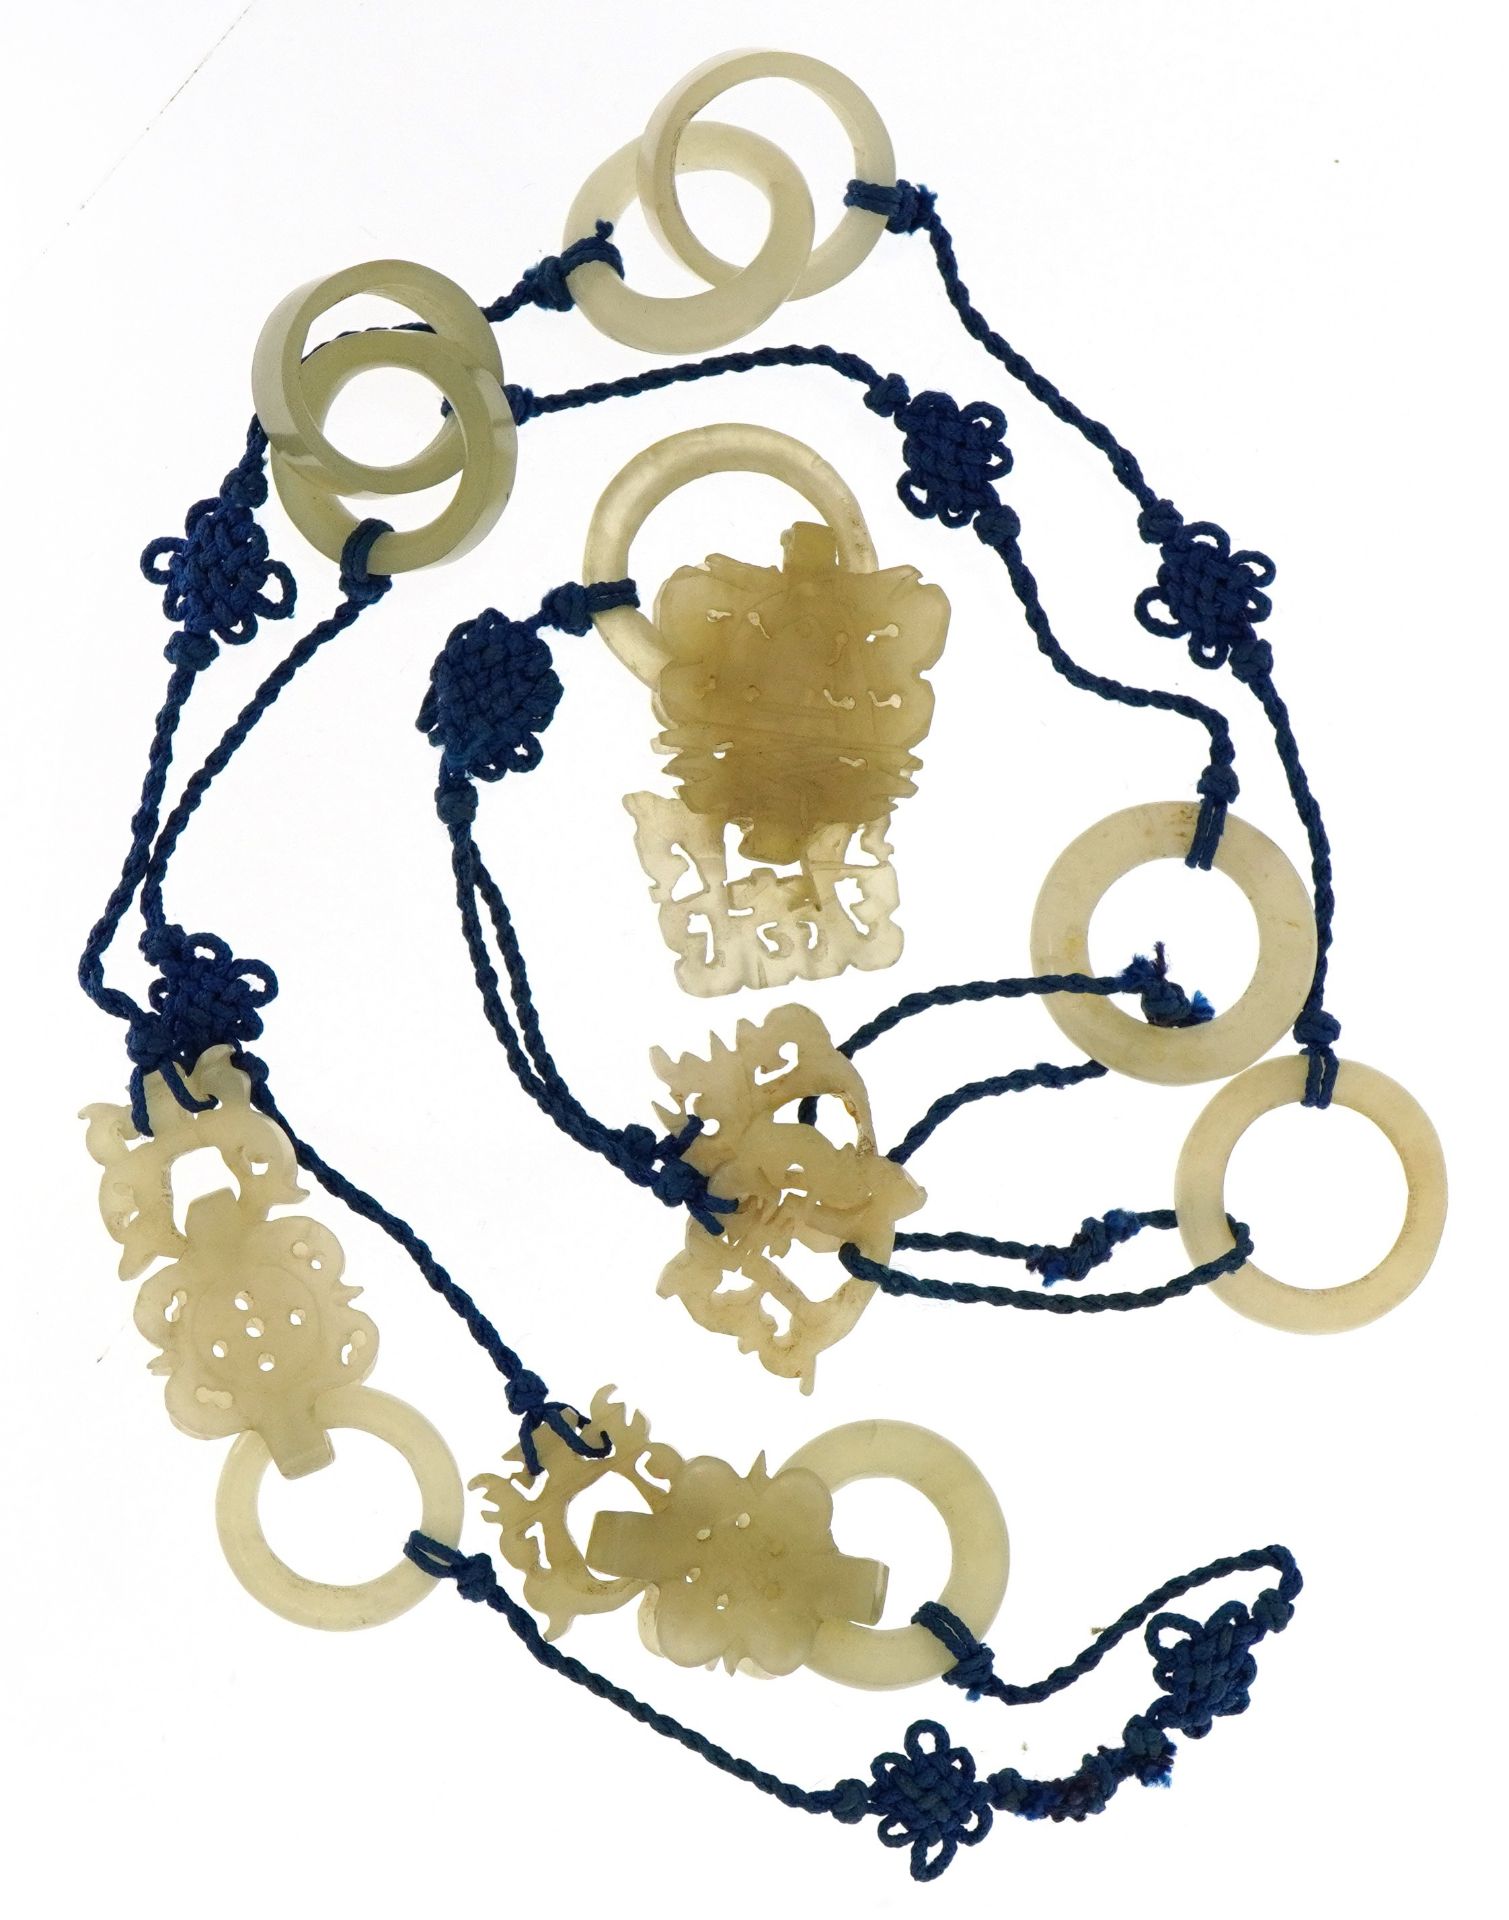 Chinese celadon jade carvings on blue cord necklace, with letter detailing it was brought by a